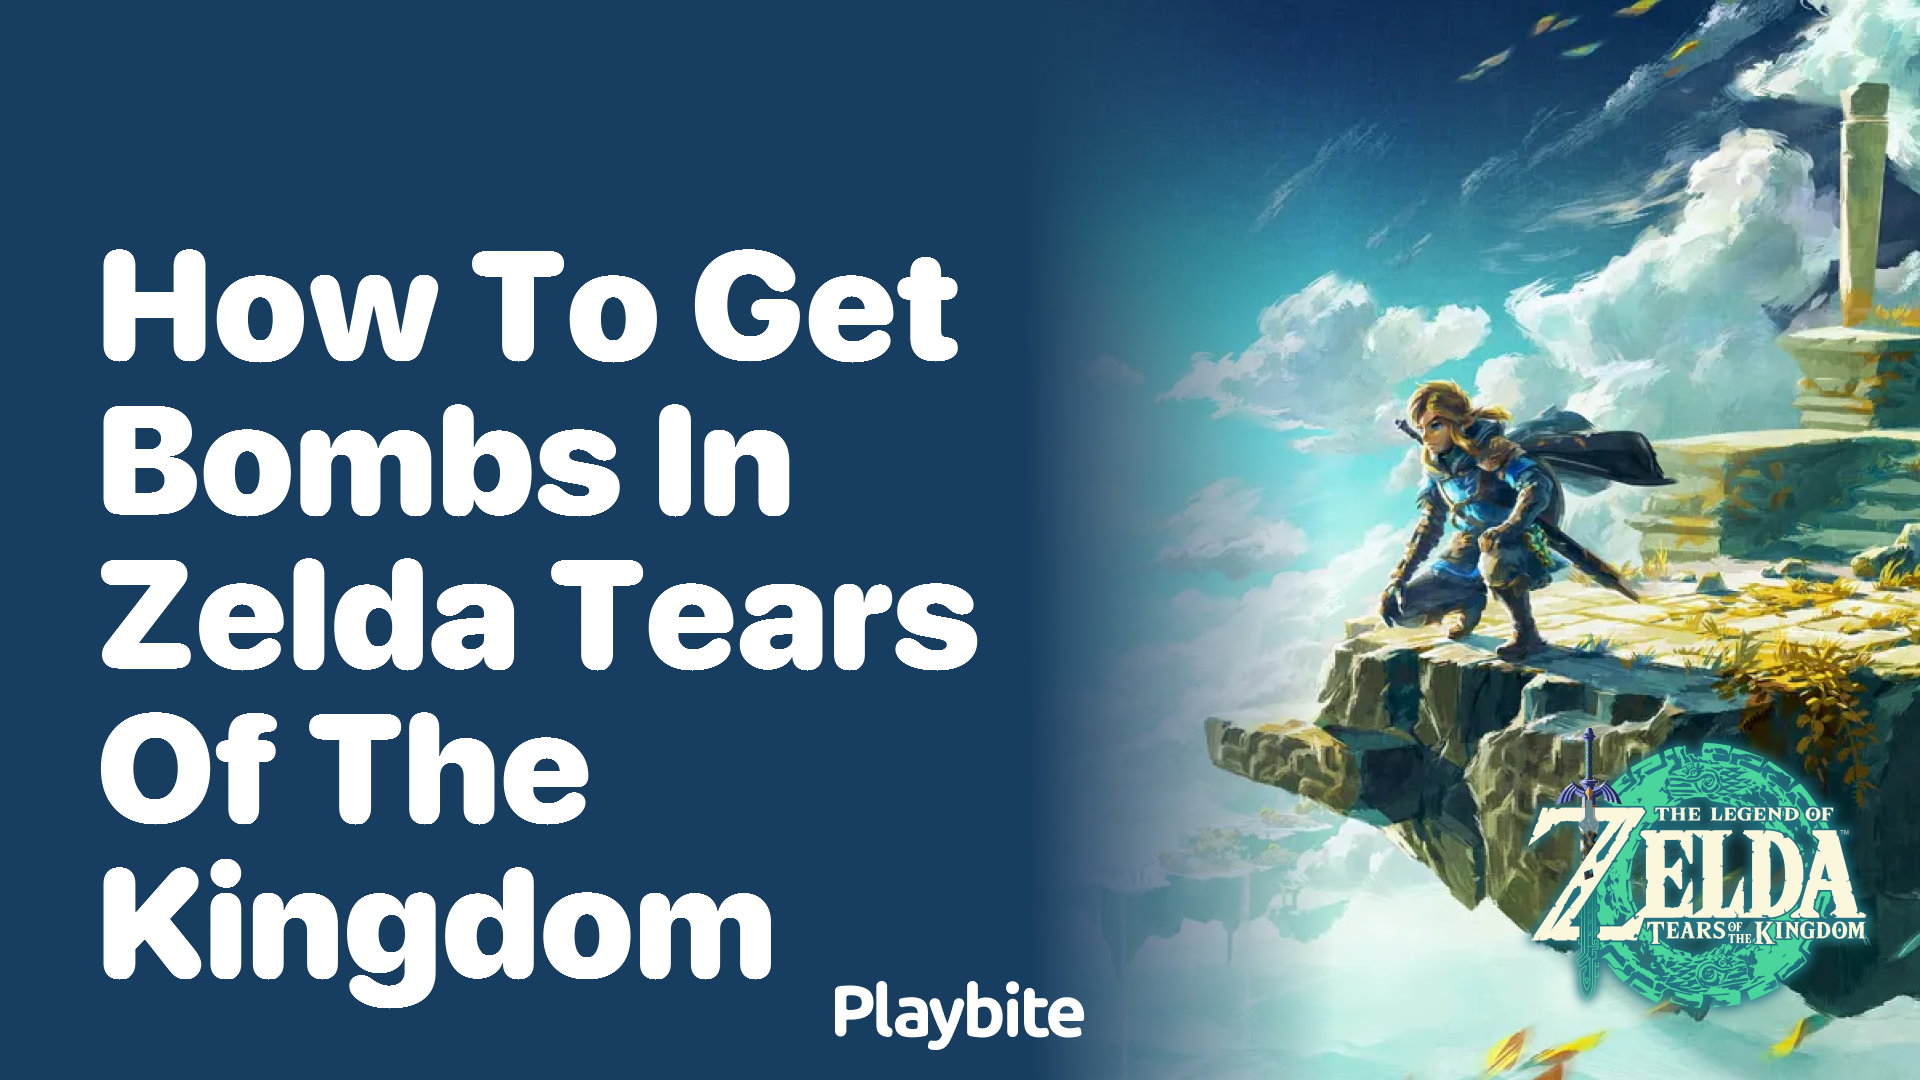 How to Get Bombs in Zelda: Tears of the Kingdom